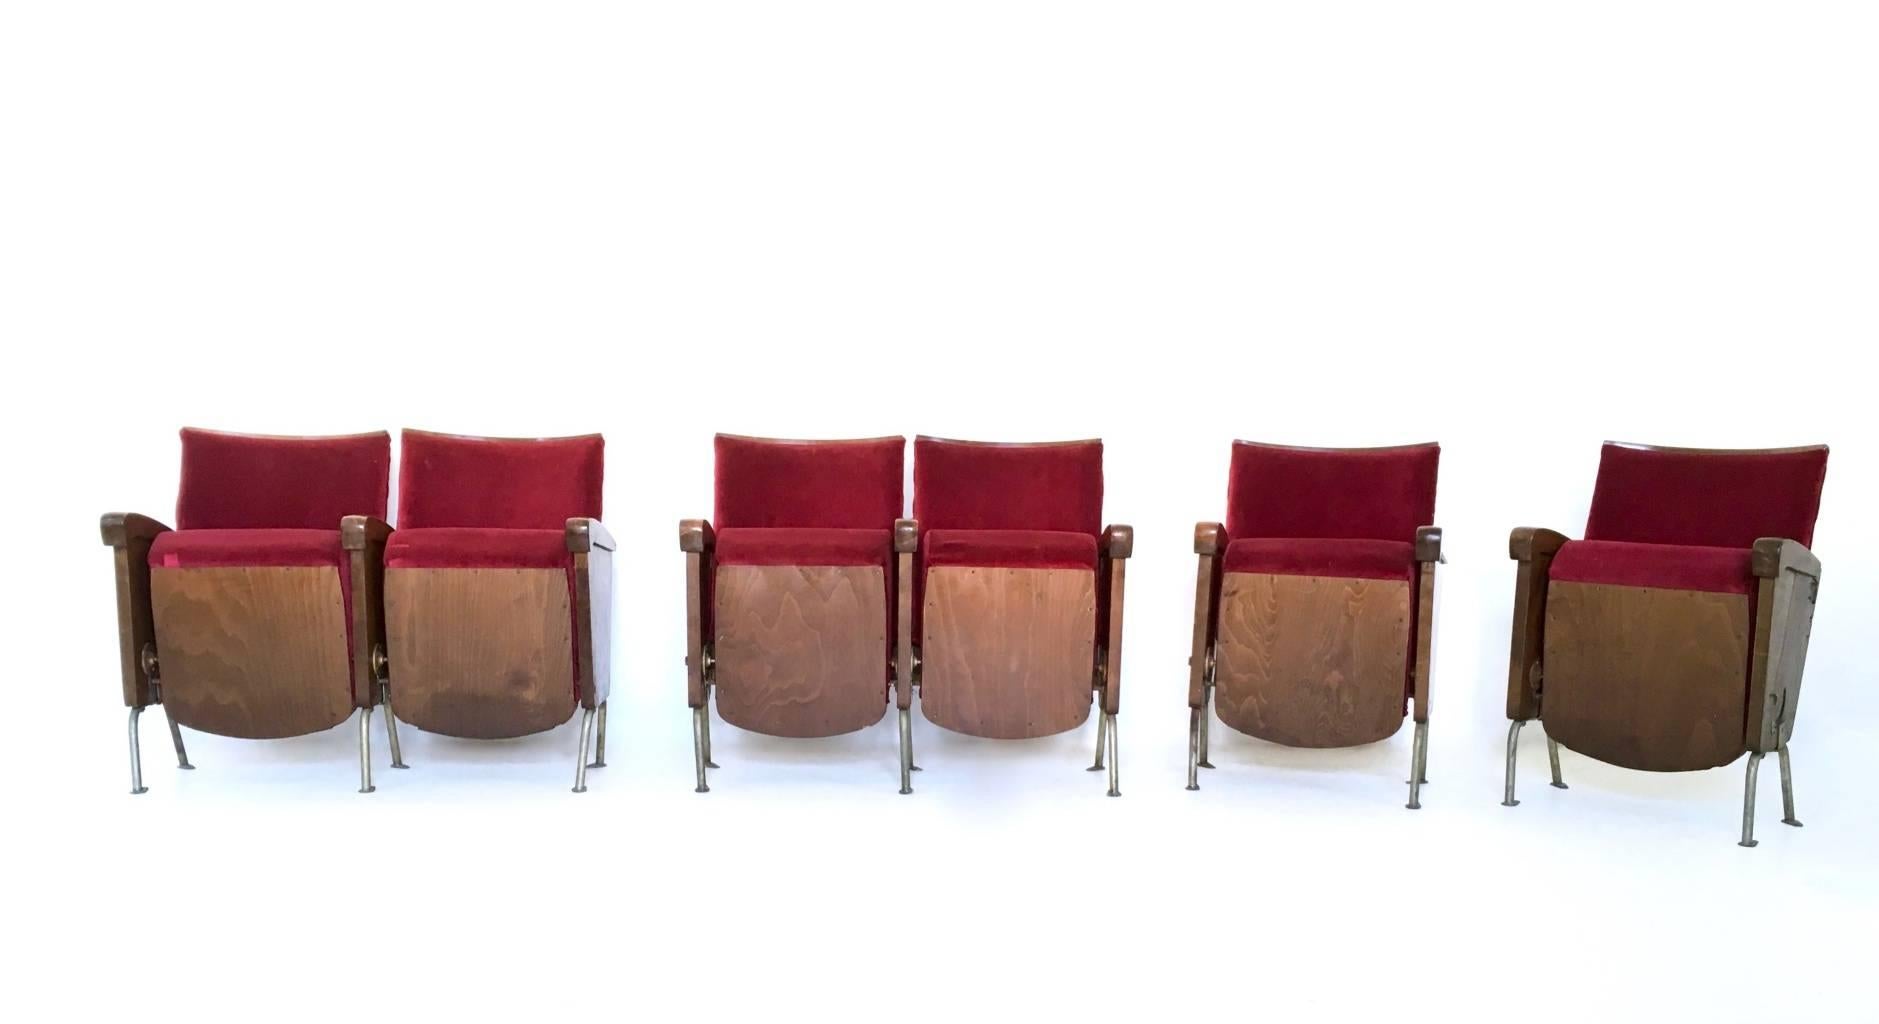 Italian Pair of Red Velvet Cinema Seats by Ascol with Wooden Structure, Italy, 1950s